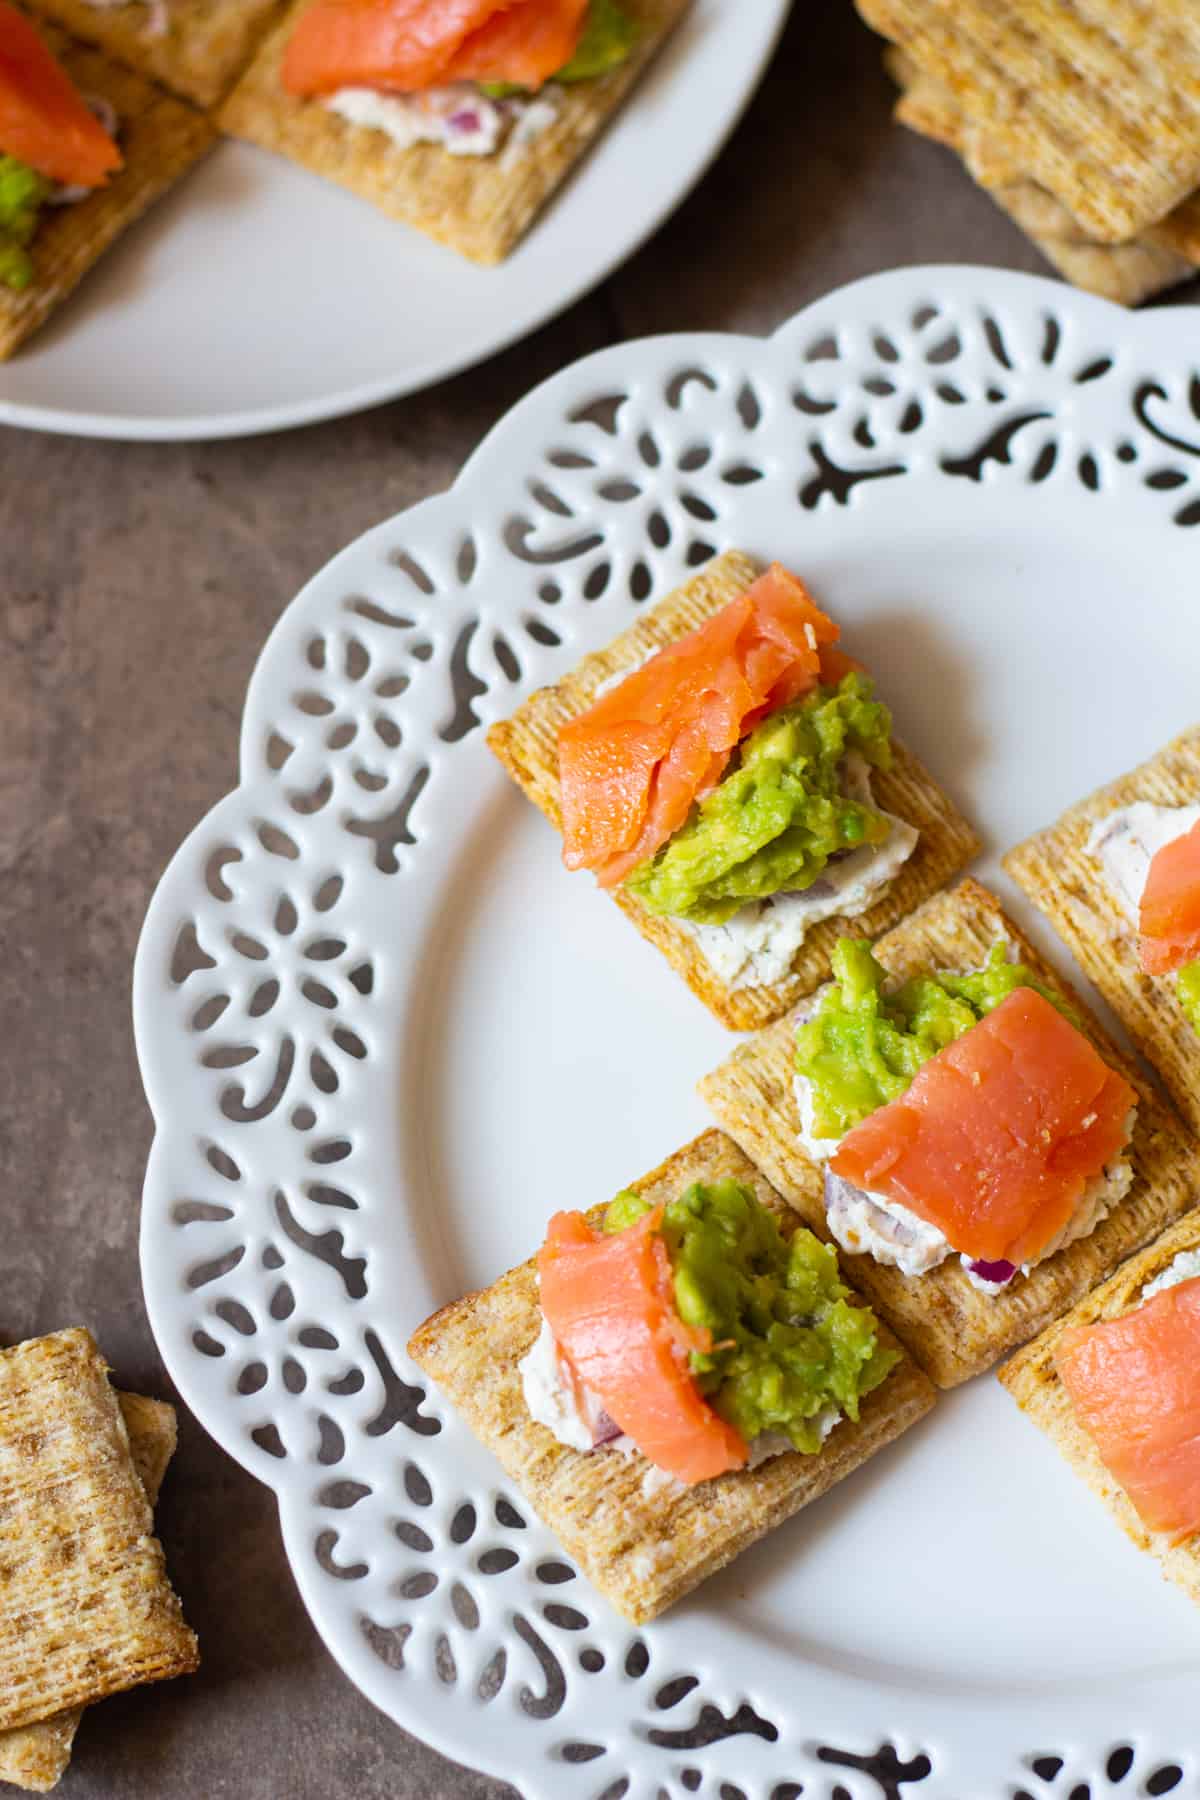 Have your guests go WOW with these Salmon Avocado bites! The smoked salmon pairs very well with goat cheese and smoked gouda crackers!